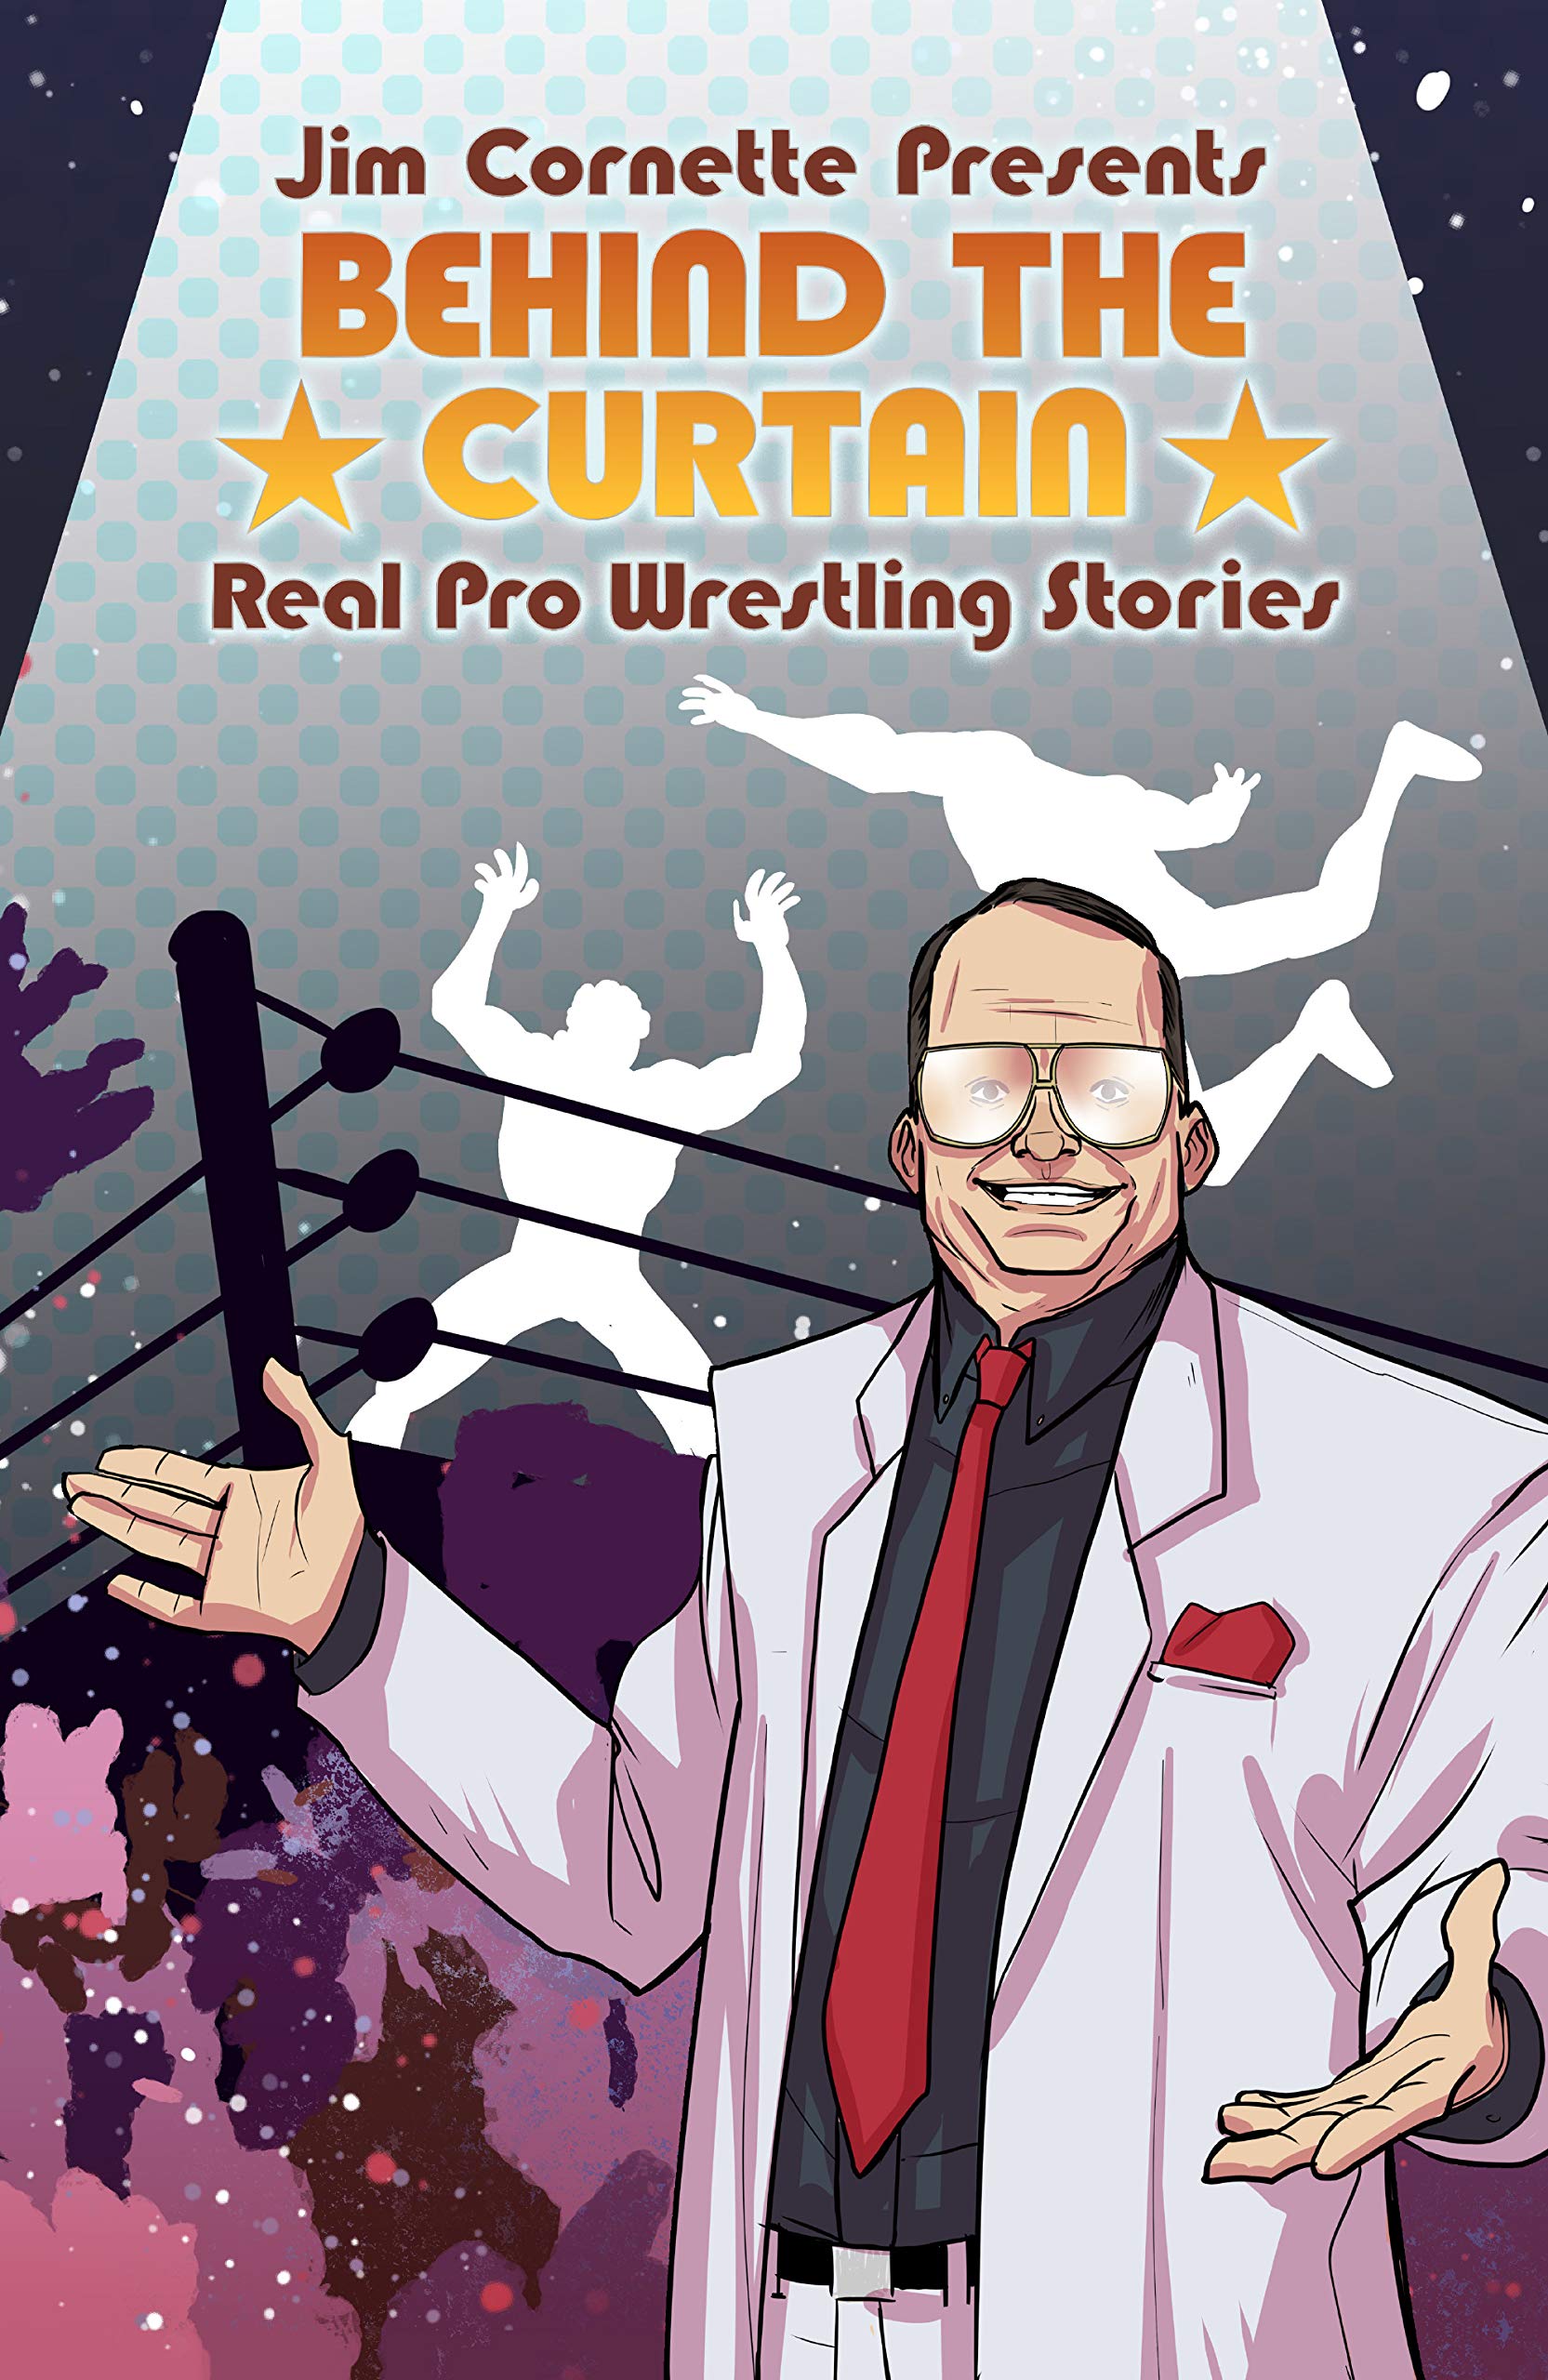 Jim Cornette Presents: Behind the Curtain—Real Pro Wrestling Stories